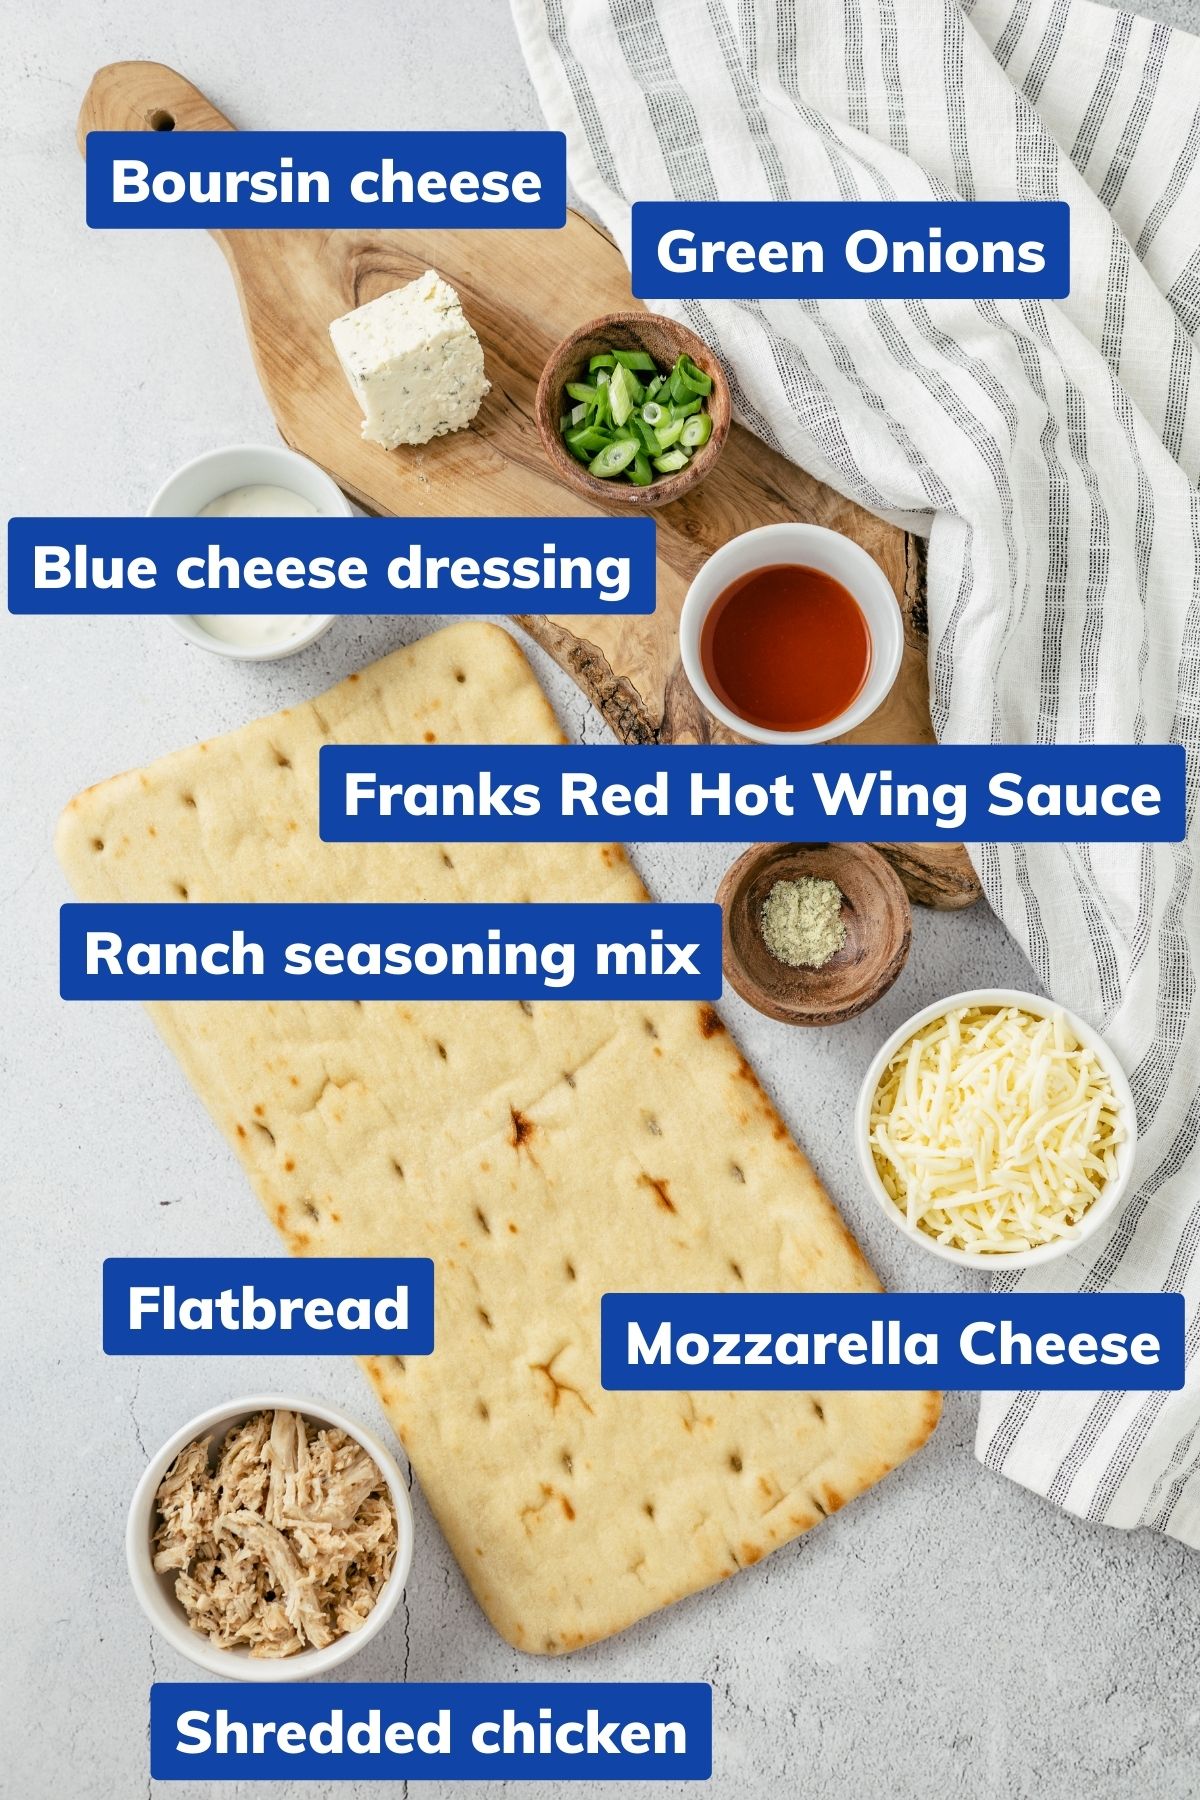 A spread of ingredients in separate bowls: Shredded Chicken, Ranch seasoning mix (garlic powder, onion powder, and more), Franks red hot wing sauce, Flatbread, Boursin cheese, Mozzarella cheese (shredded), Blue cheese dressing (homemade dip), and Green onions.